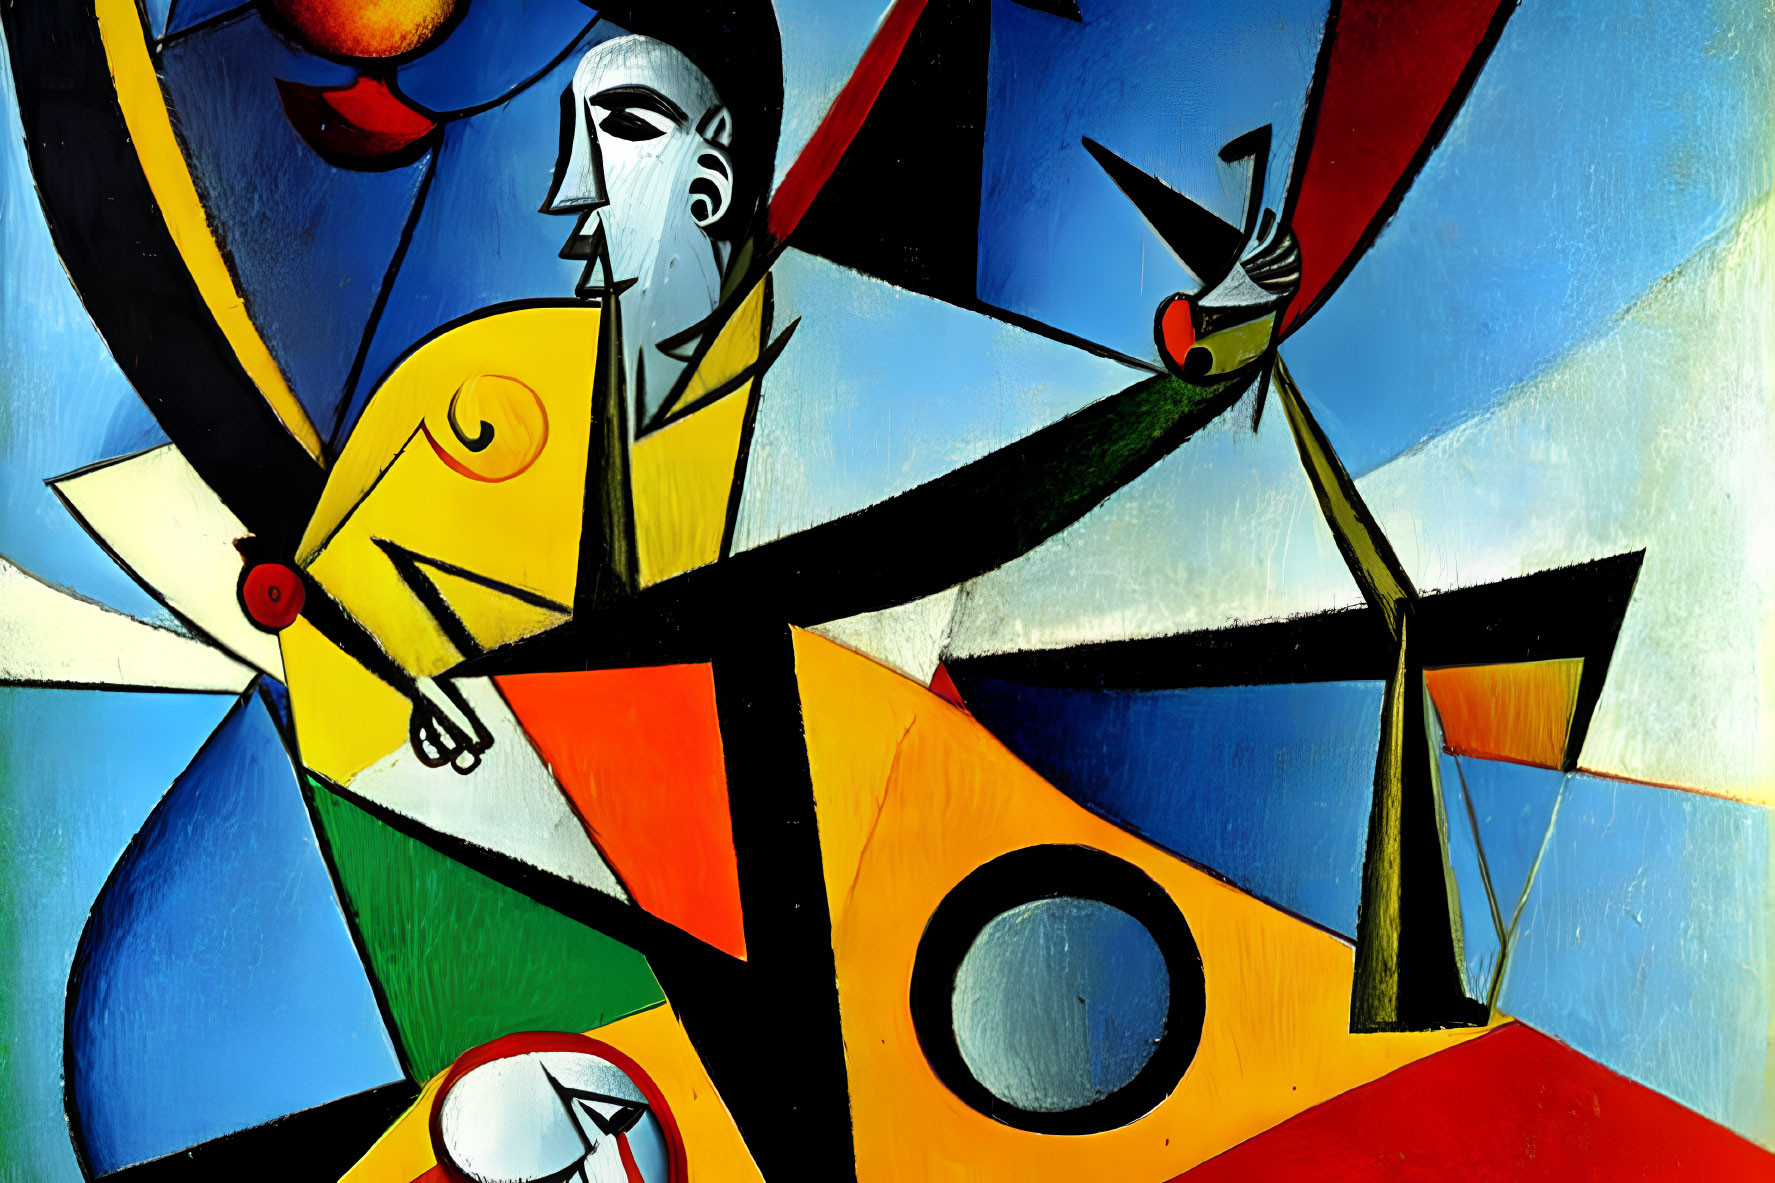 Colorful Cubist Painting with Geometric Shapes and Fragmented Figures